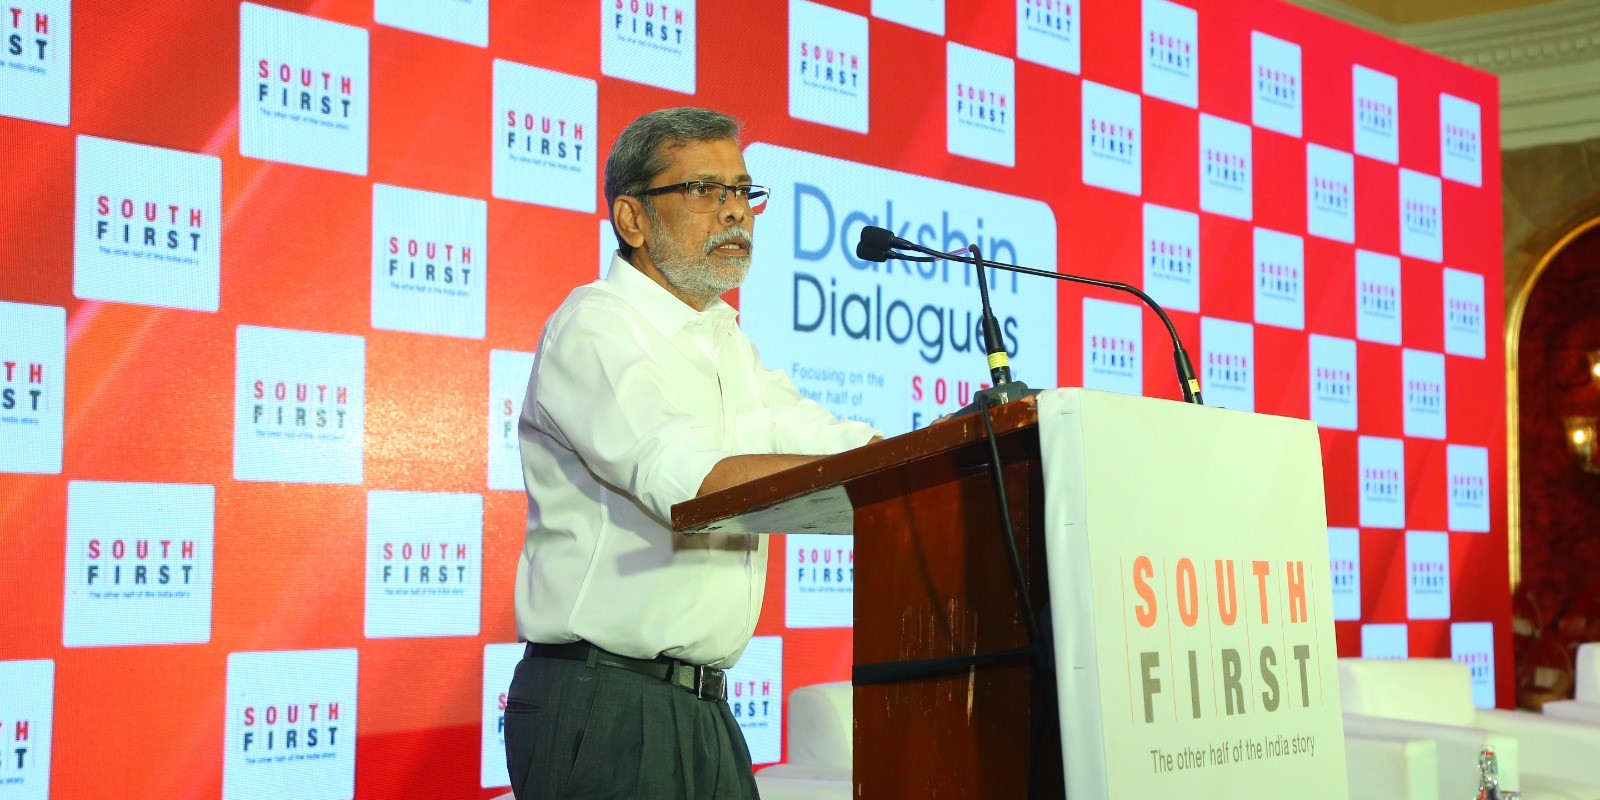 Vasu Gandikota: Dakshin Dialogues is yet again a time to discuss, debate the concerns of the South